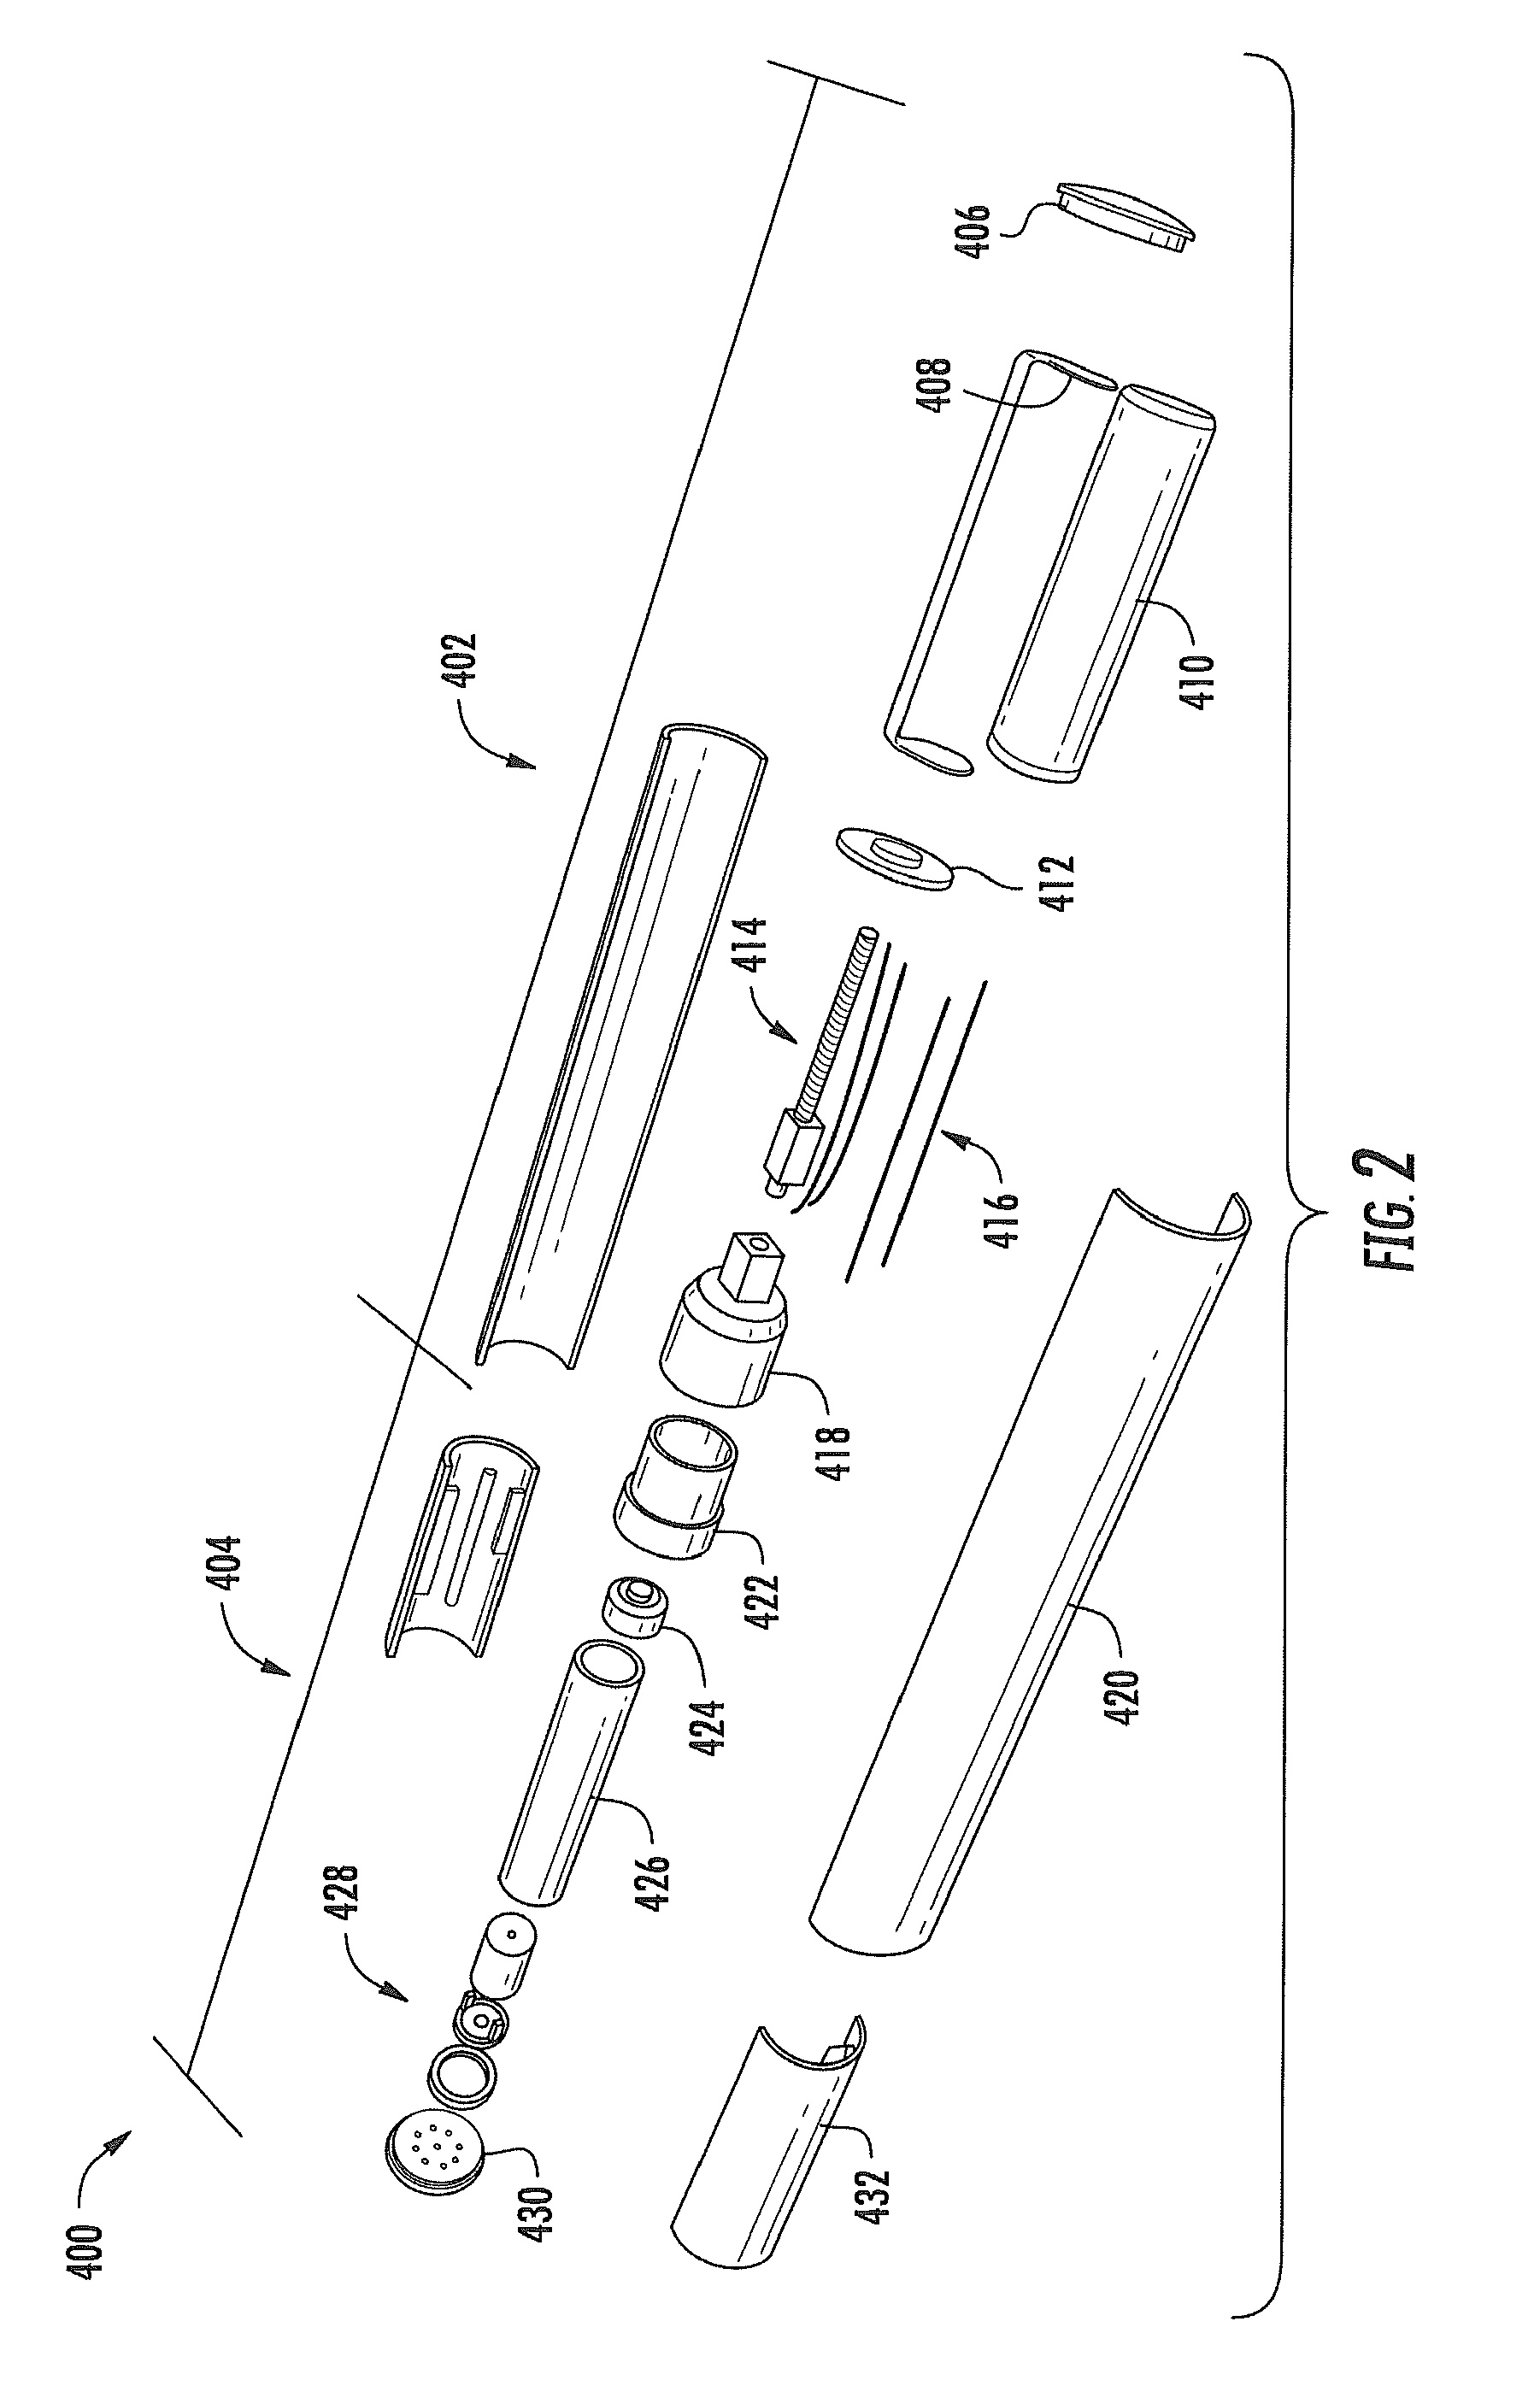 Aerosol Delivery Device Including a Positive Displacement Aerosol Delivery Mechanism